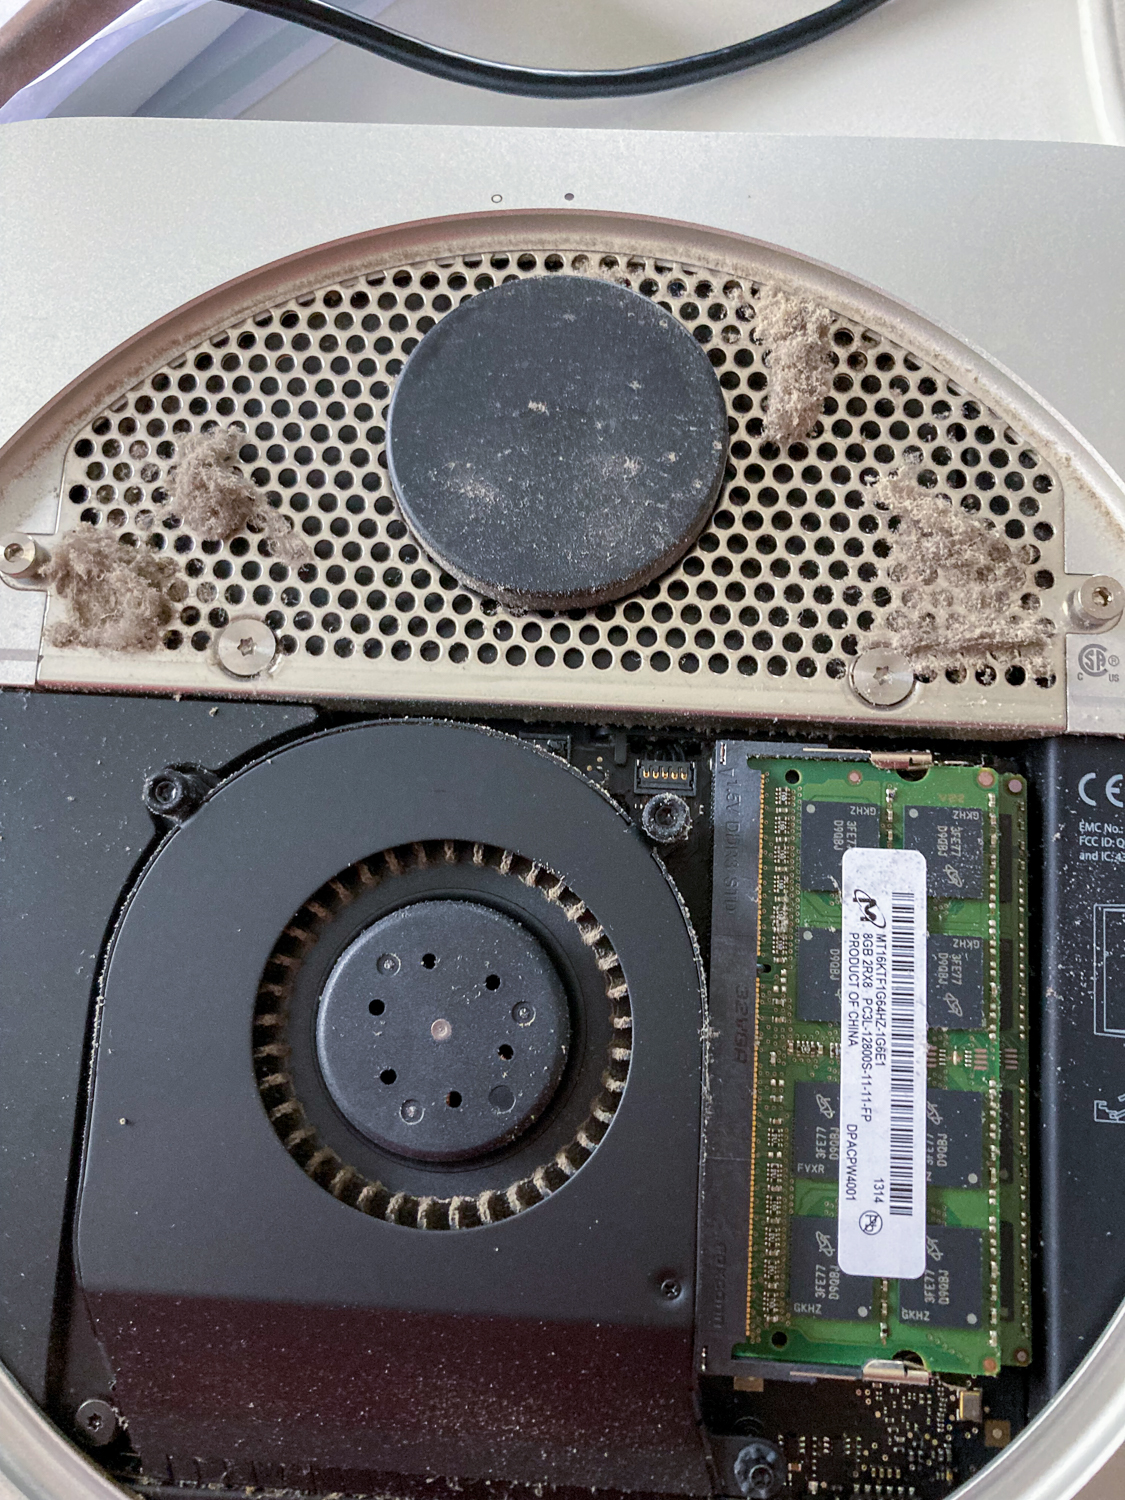 A Mac Mini with the back removed and a lot of dust inside